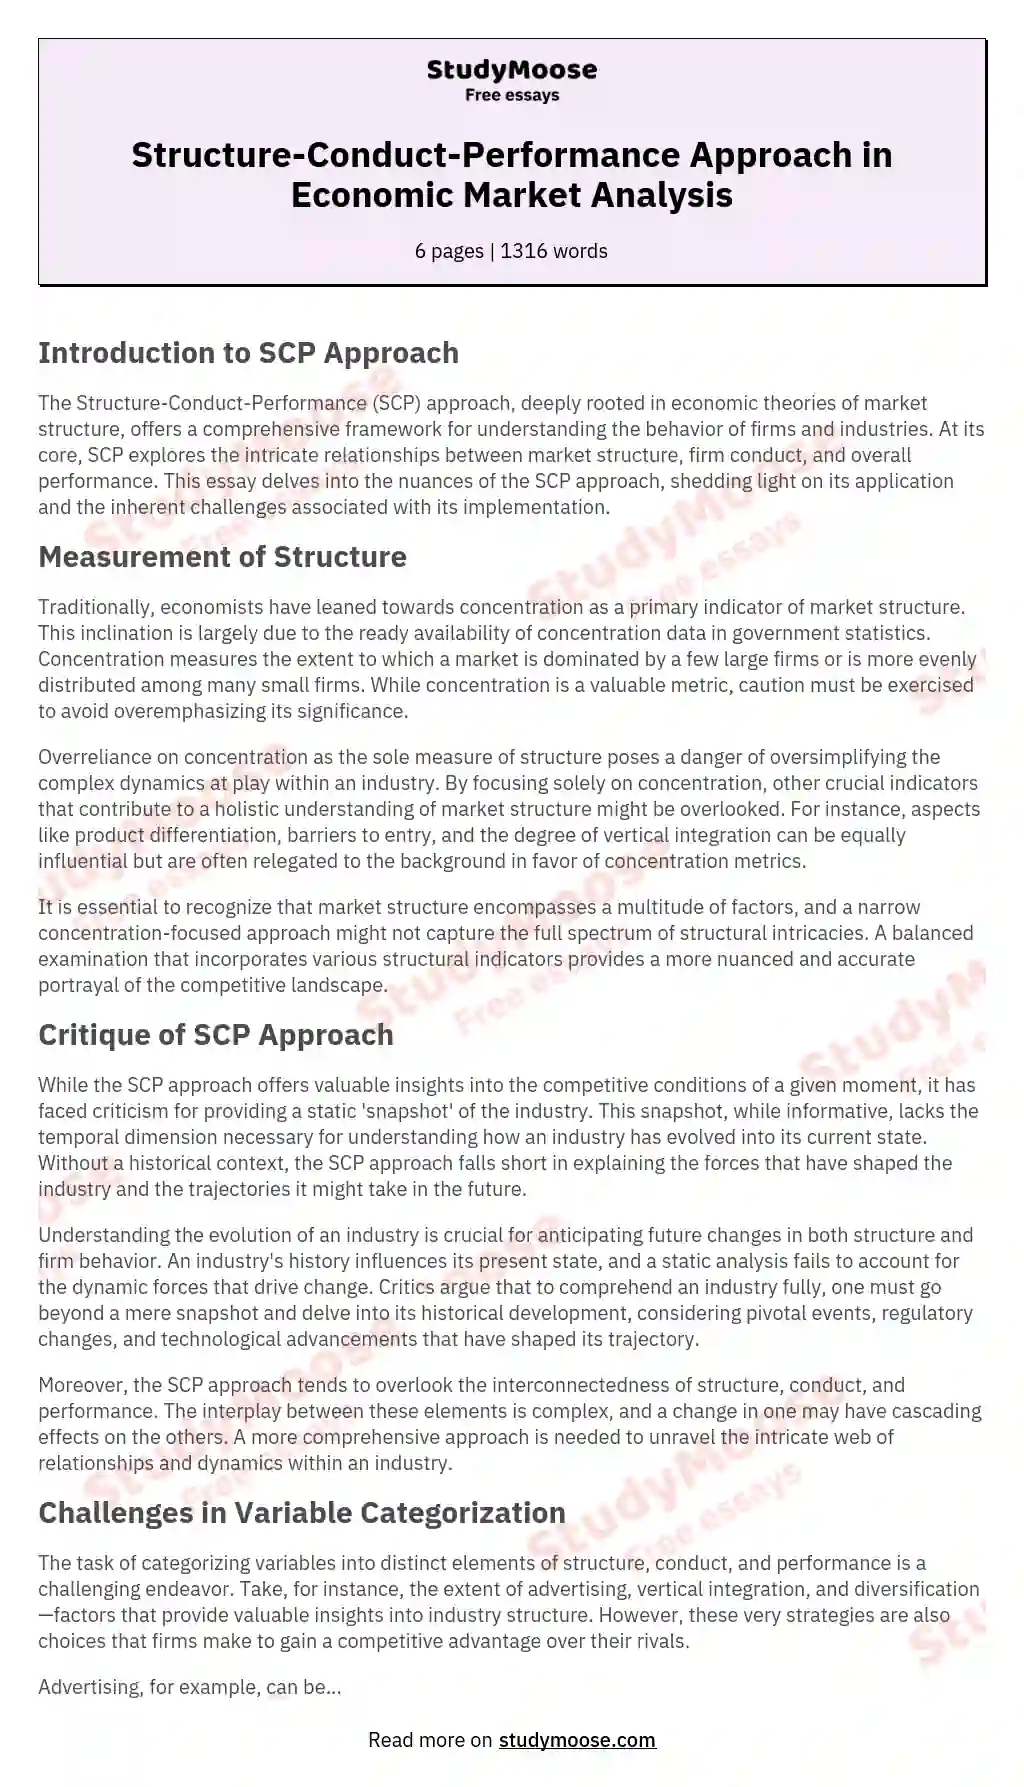 A Critique of the Structure Conduct Performance Paradigm (SCP)